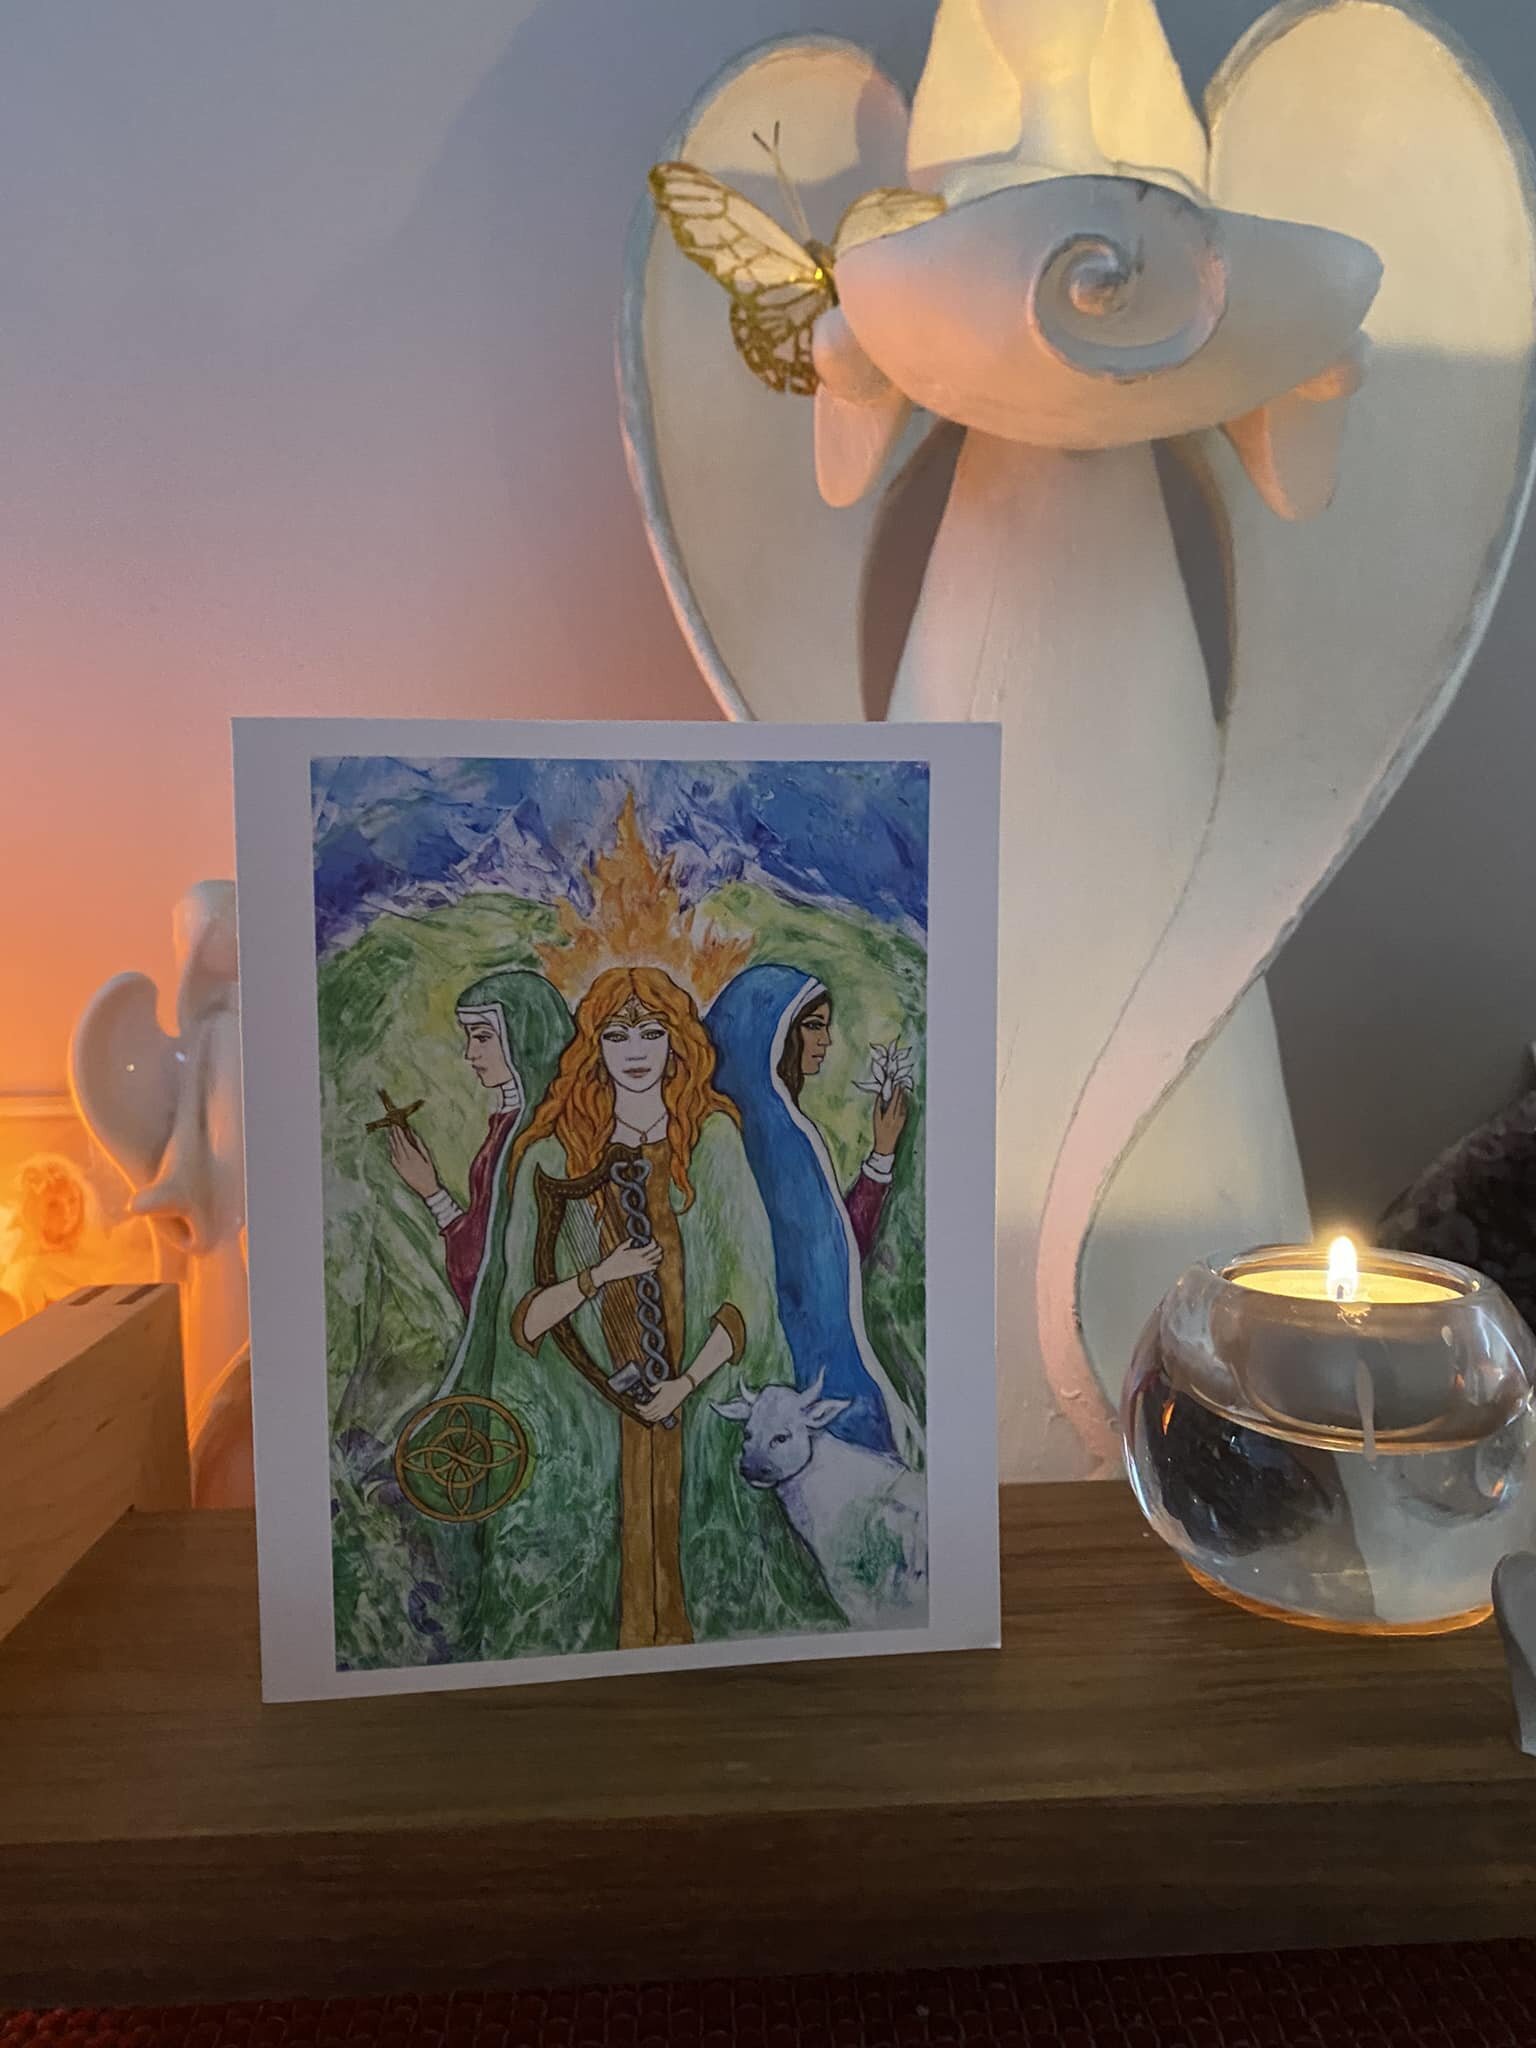 Look 👀 who has announced her presence on my altar&hellip;
Triple Goddess Brigid - by my extremely talented friend Baraka Robin Berger 😍
Love her! LOVE Baraka too, as she well knows!
Everyone knows I love Baraka 🥰